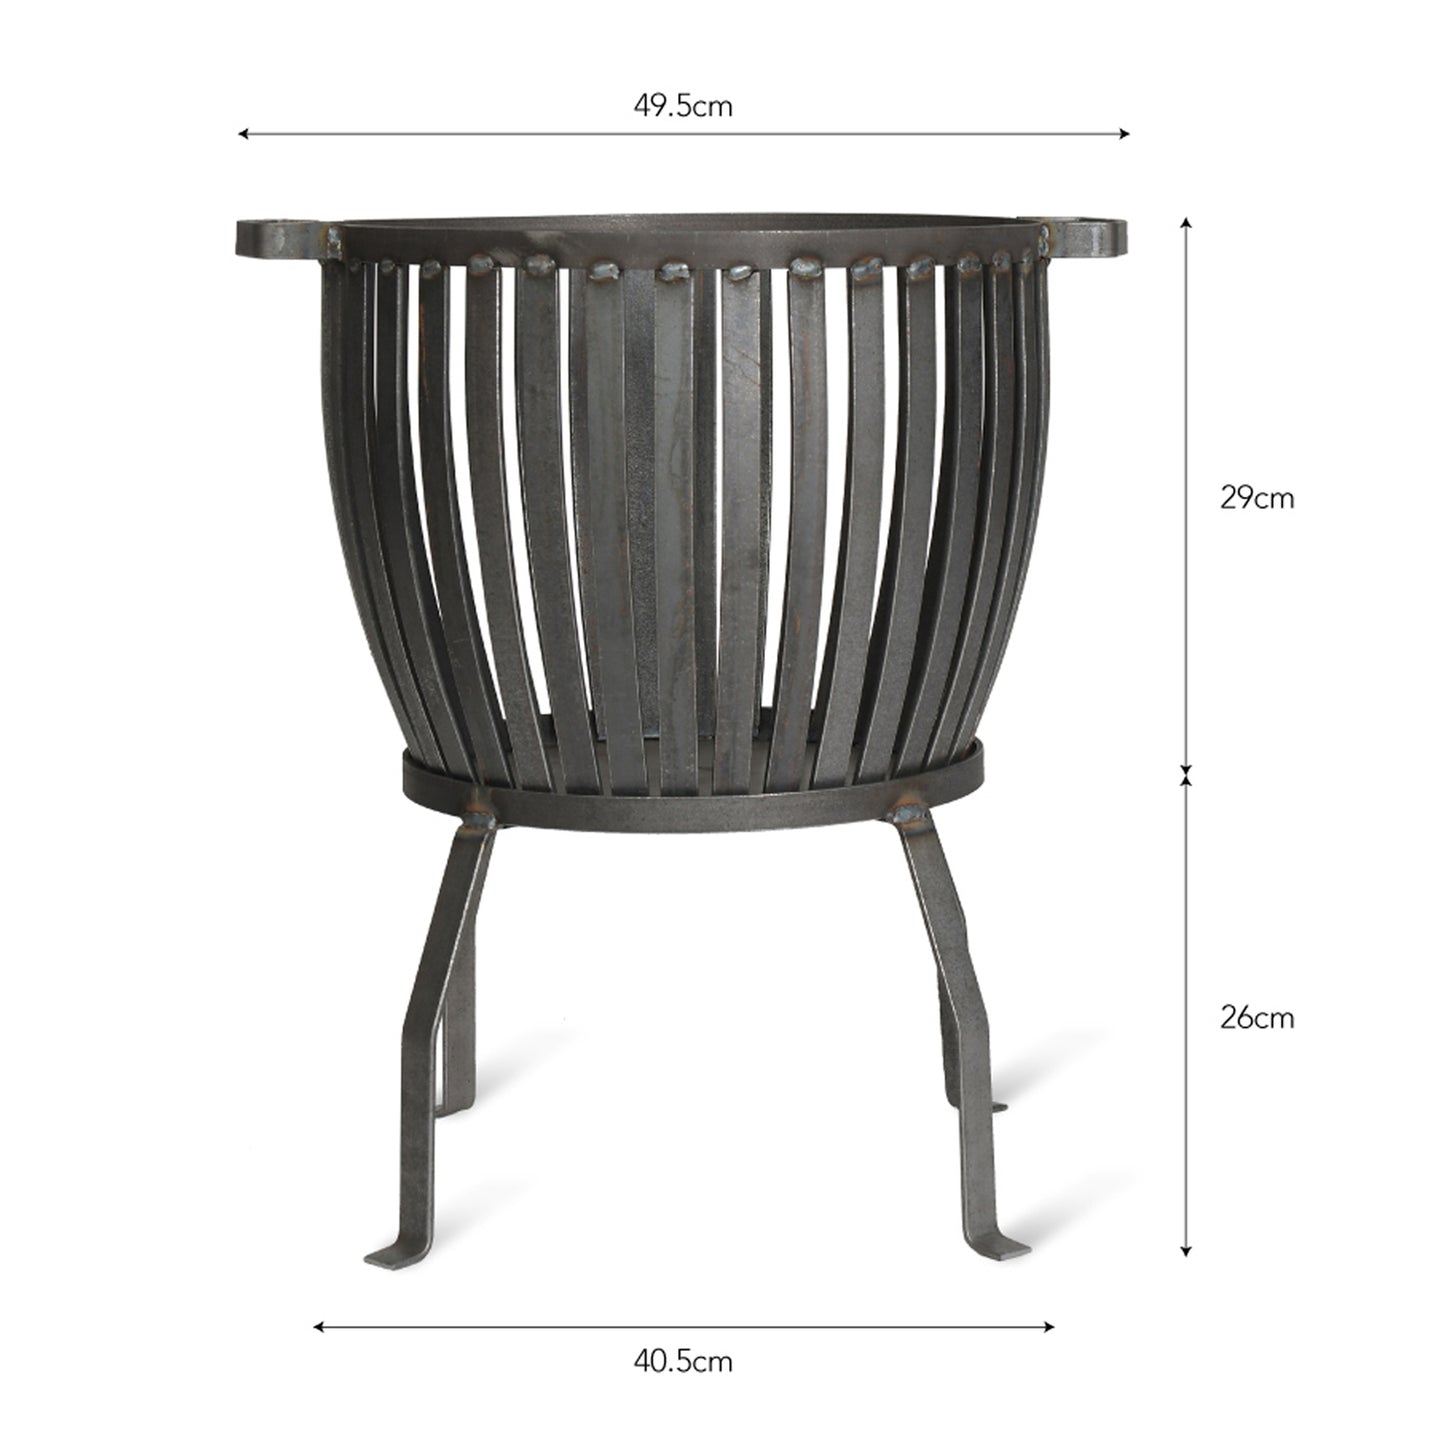 Barrington Fire Pit Small Steel by Garden Trading